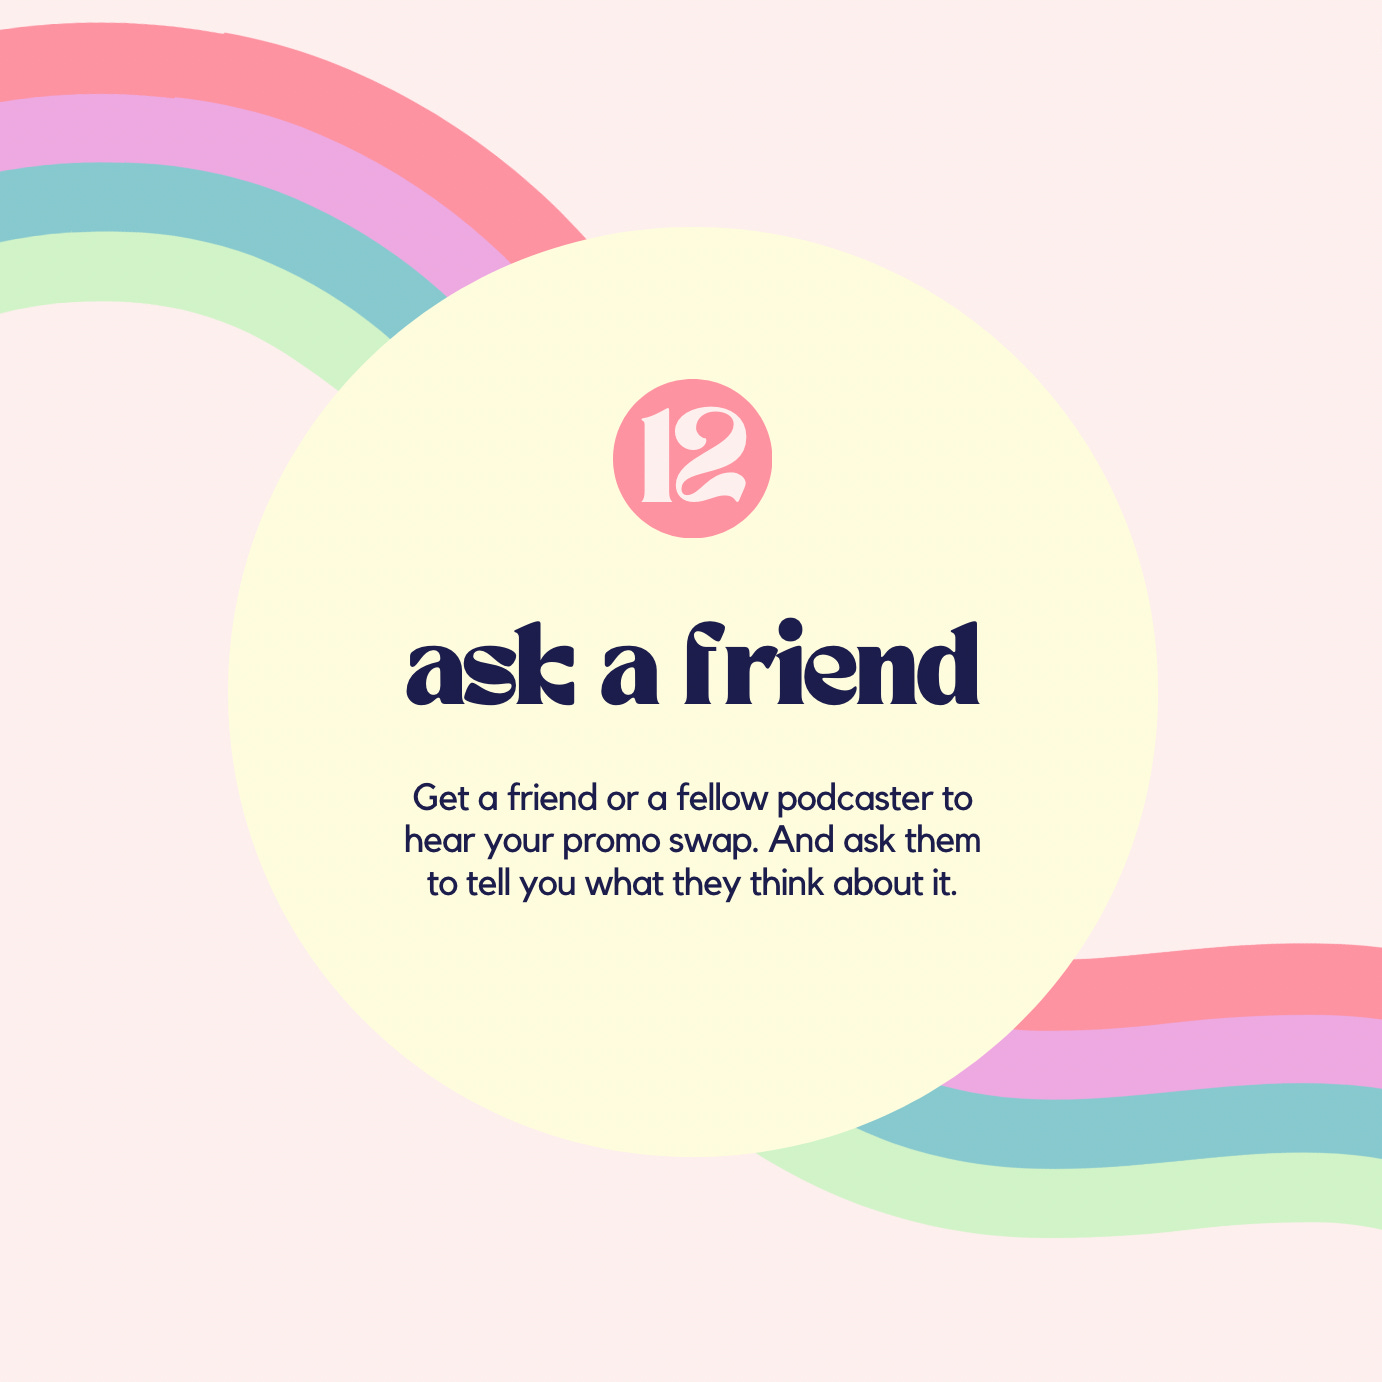 12. Ask a friend. Get a friend or a fellow podcaster to hear your promo swap. And ask them to tell you what they think about it.